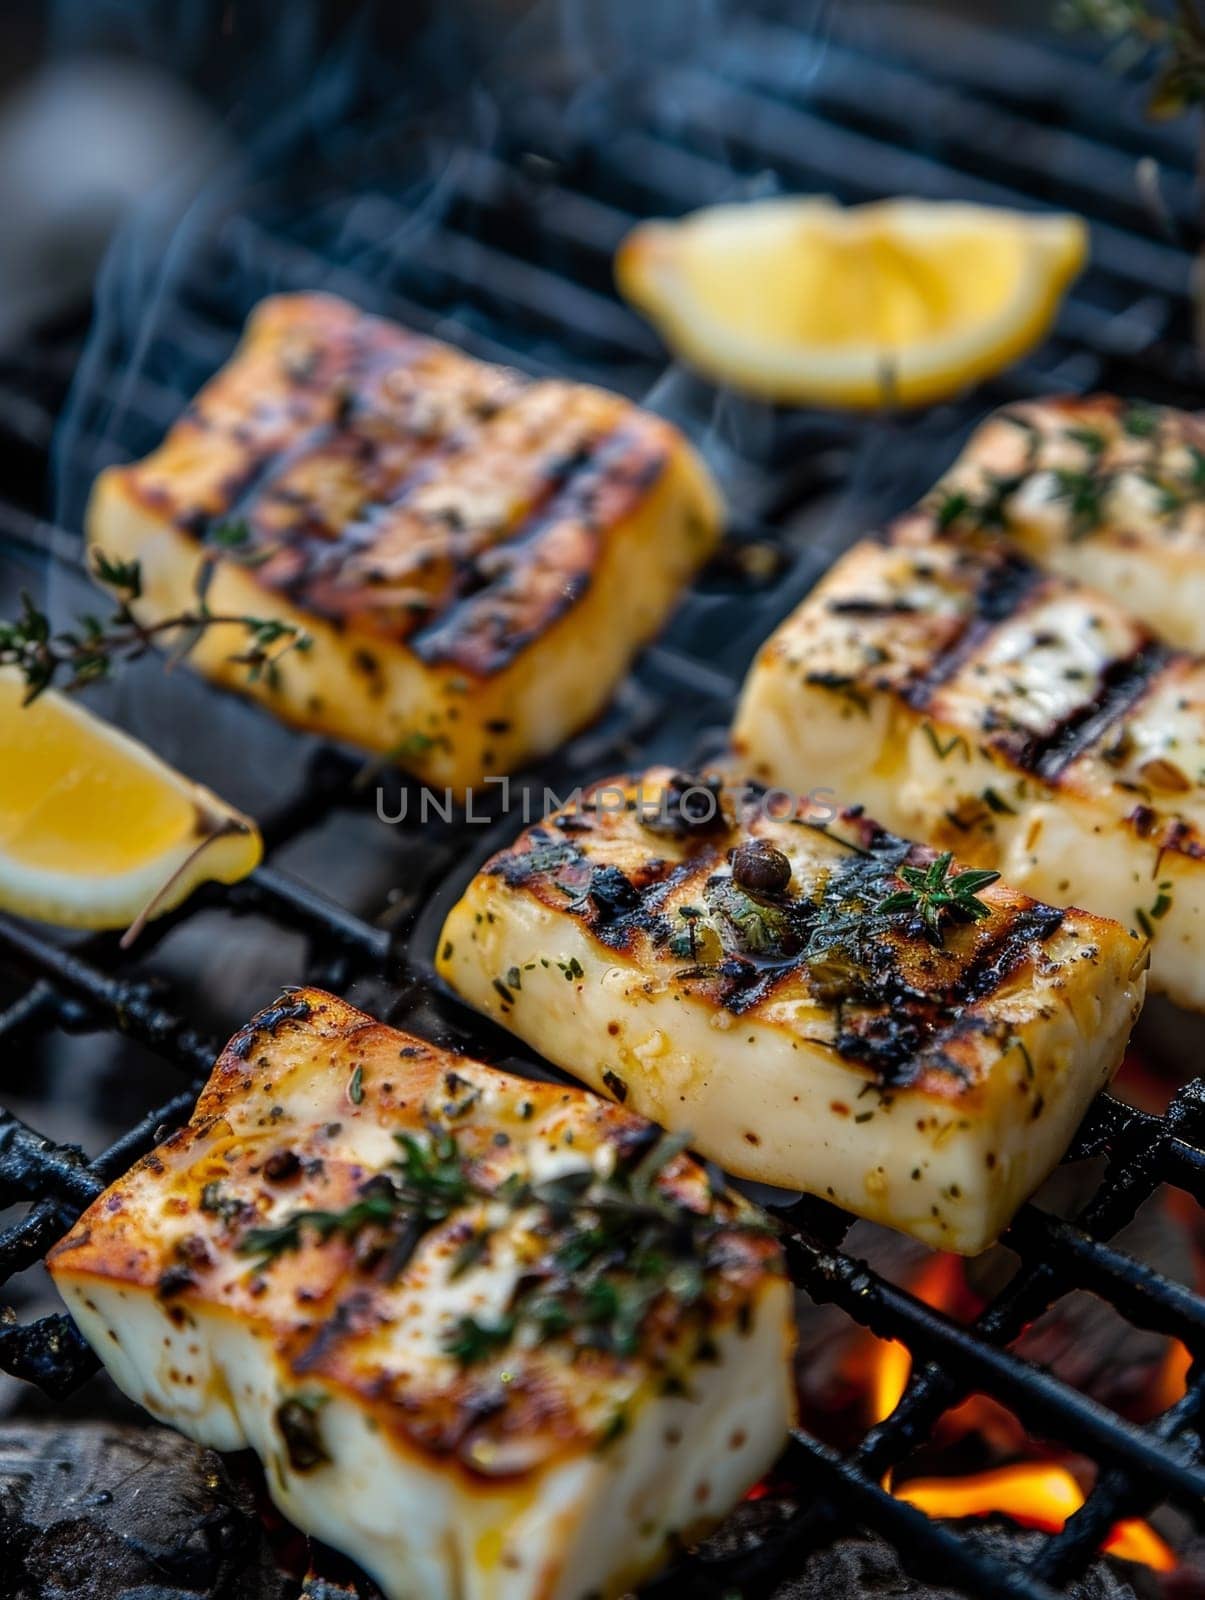 Authentic Cypriot halloumi cheese, grilled to perfection and served with fresh lemon wedges and a drizzle of fragrant olive oil - a mouthwatering representation of the rich culinary traditions. by sfinks